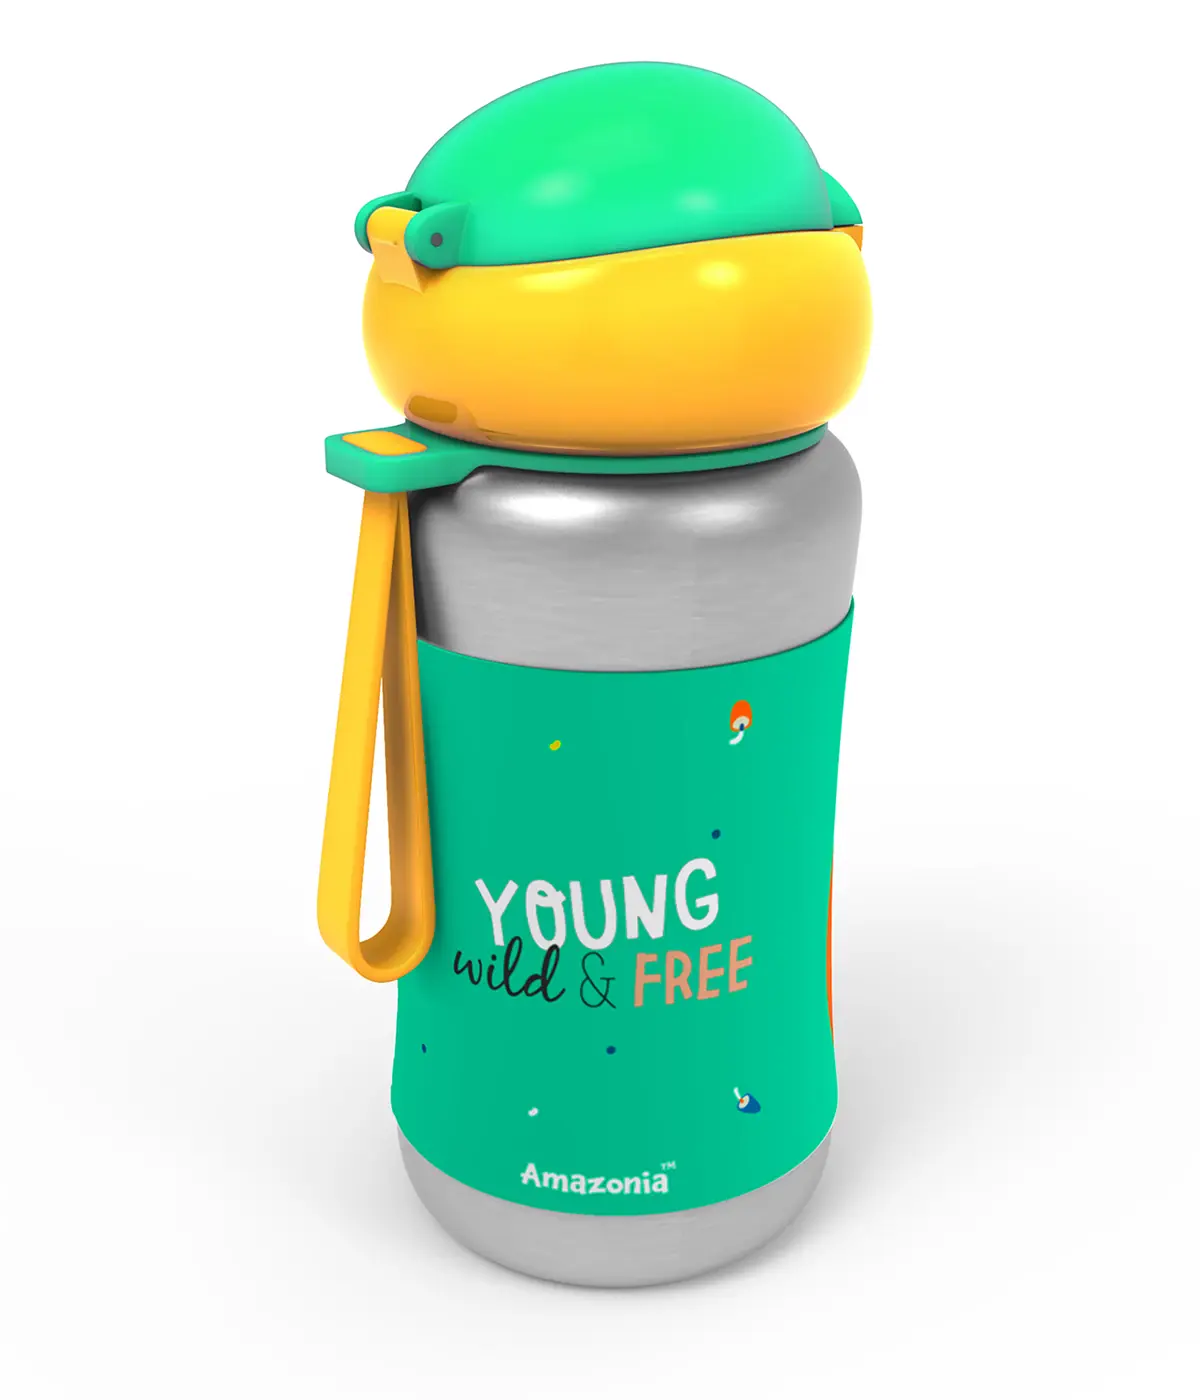 Rabitat Steel Play Sports Stainless Steel Sipper Bottle Young Wild & Free 350 ml For Kids of Age 3Y+, Multicolour